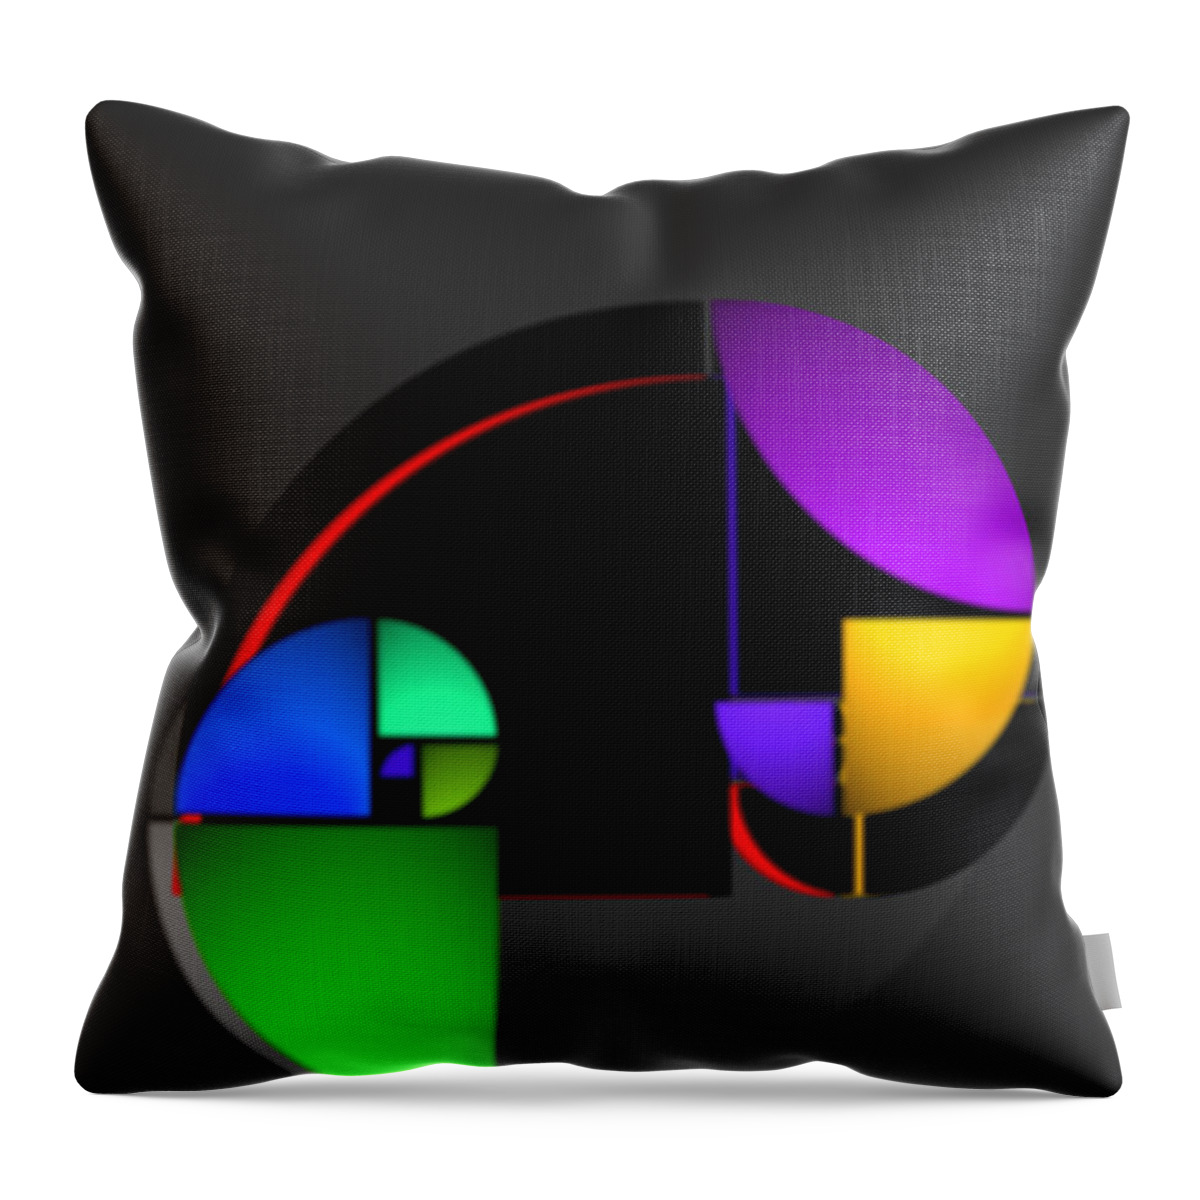  Throw Pillow featuring the painting Spiralaxy by Charles Stuart